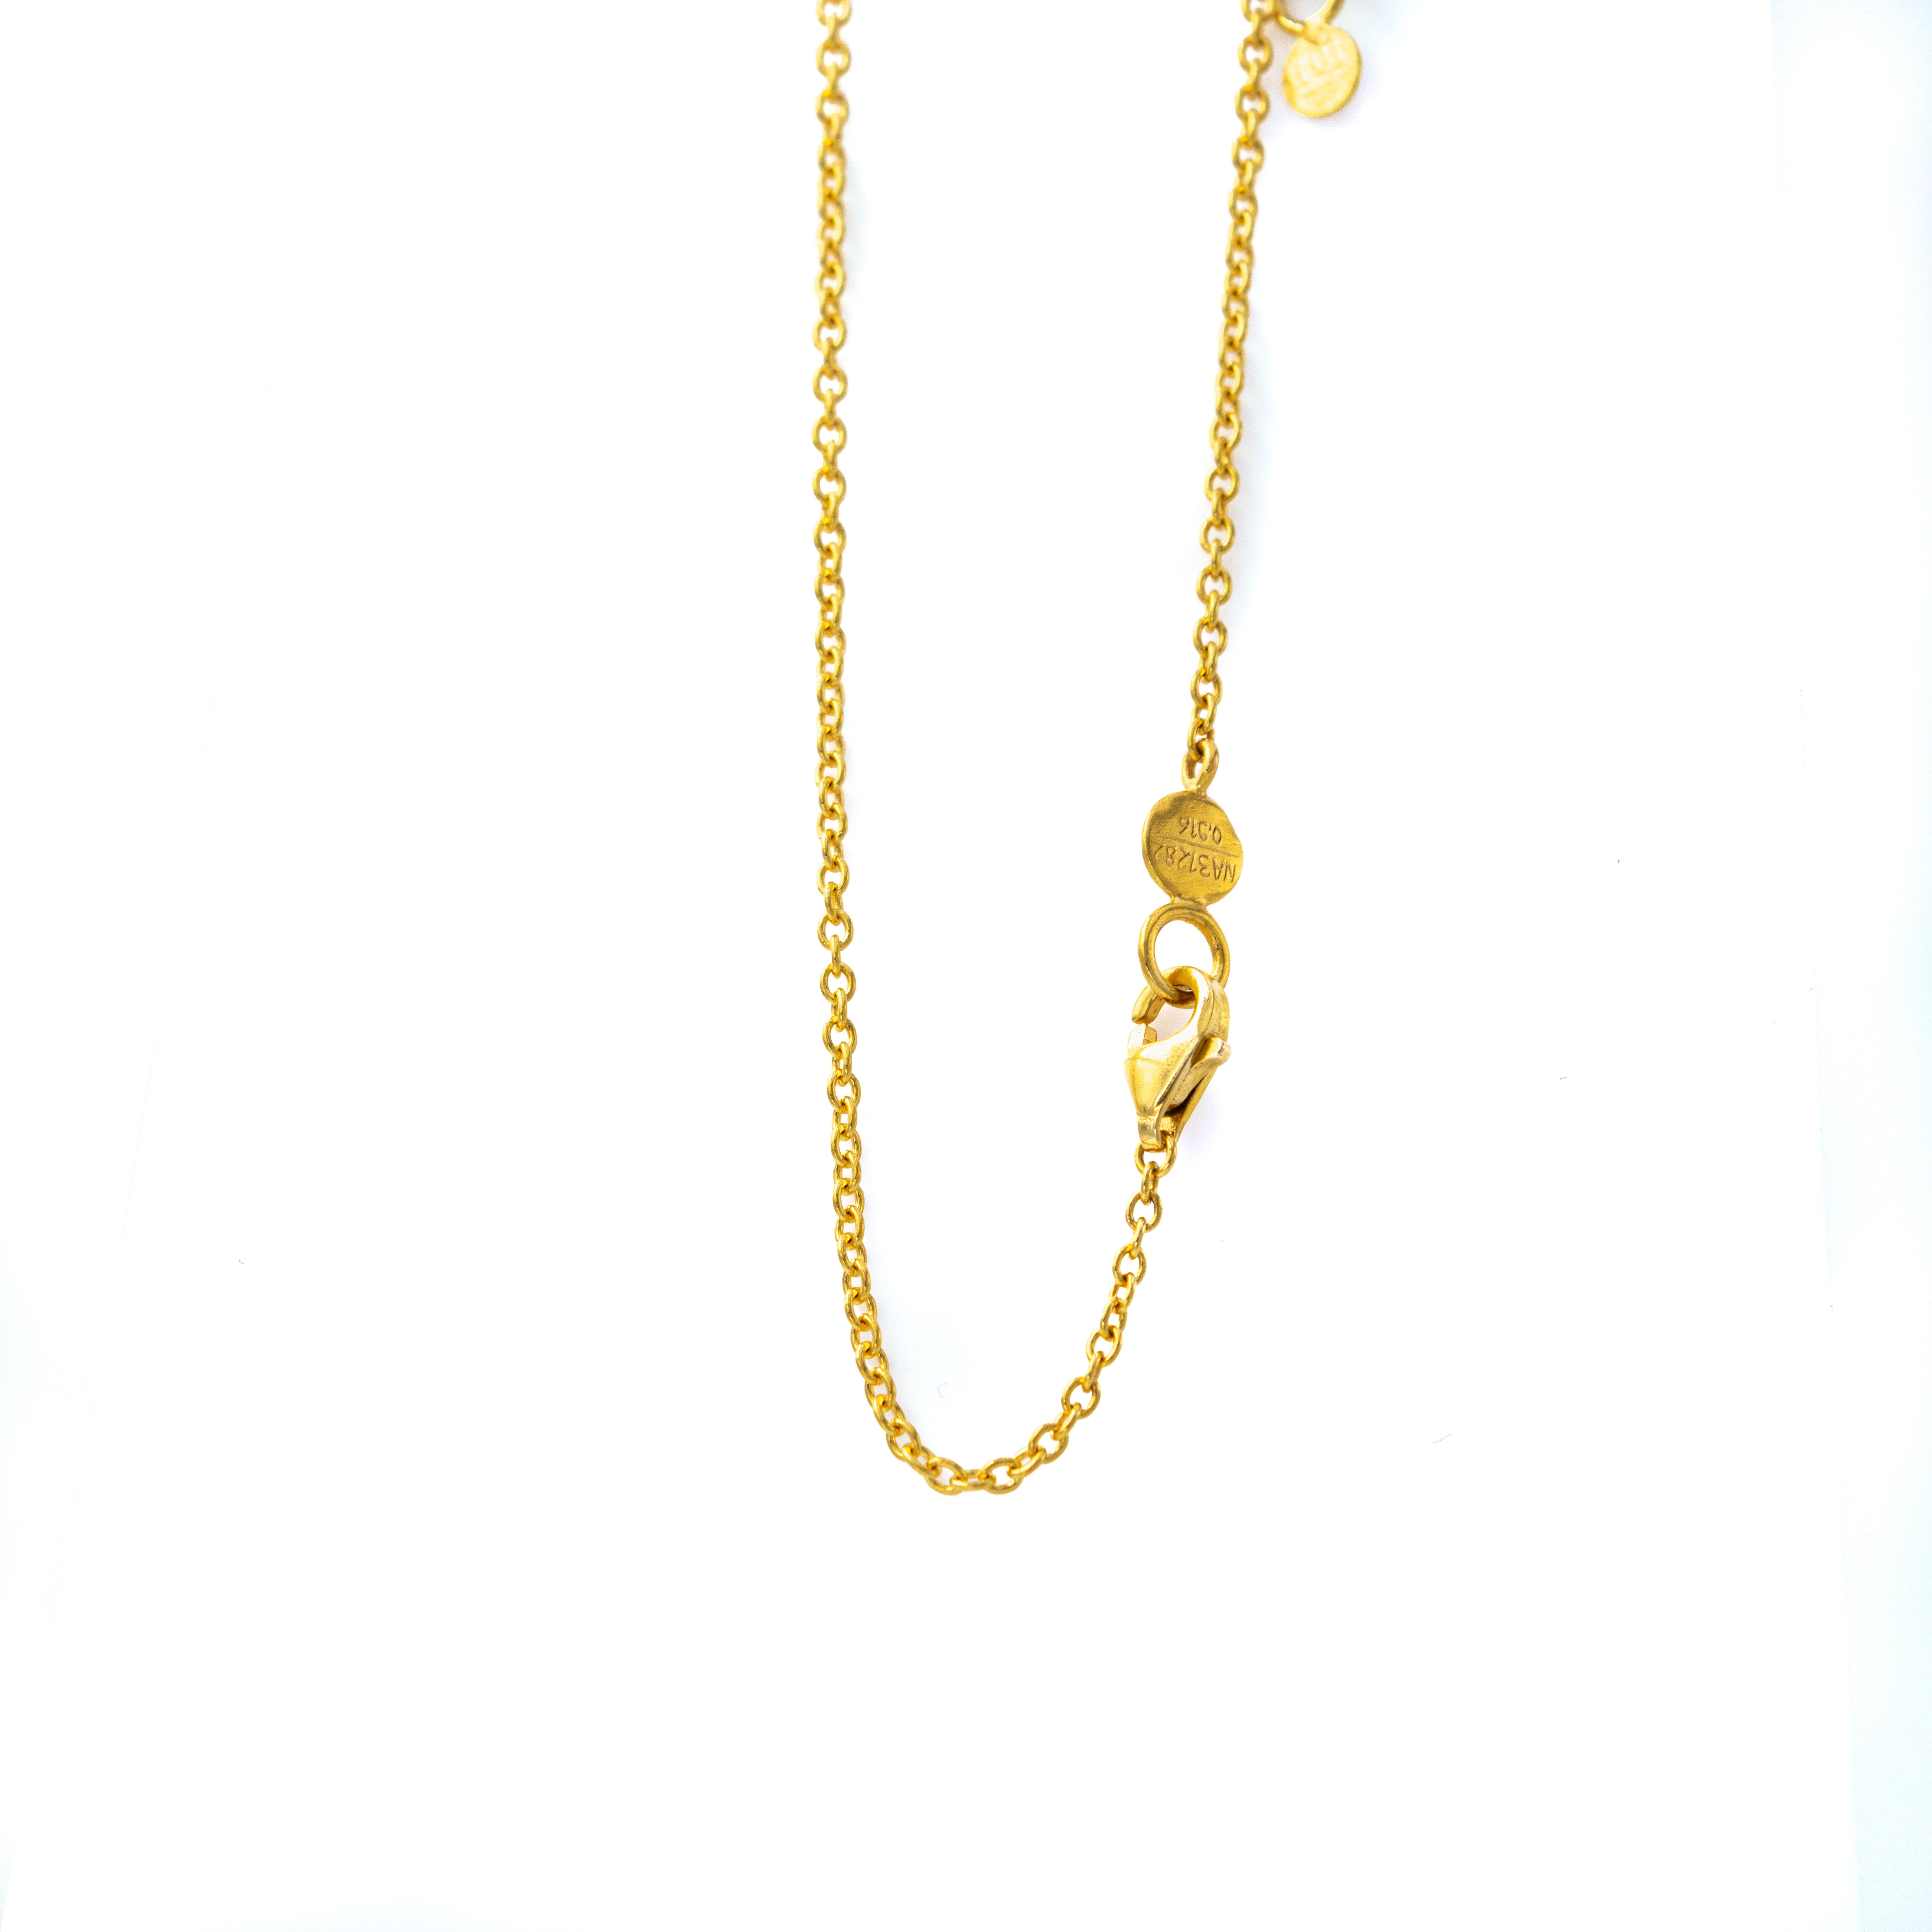 Women's or Men's Gurhan One of a Kind Mosaic Pendant Necklace in 24 Karat Yellow Gold For Sale